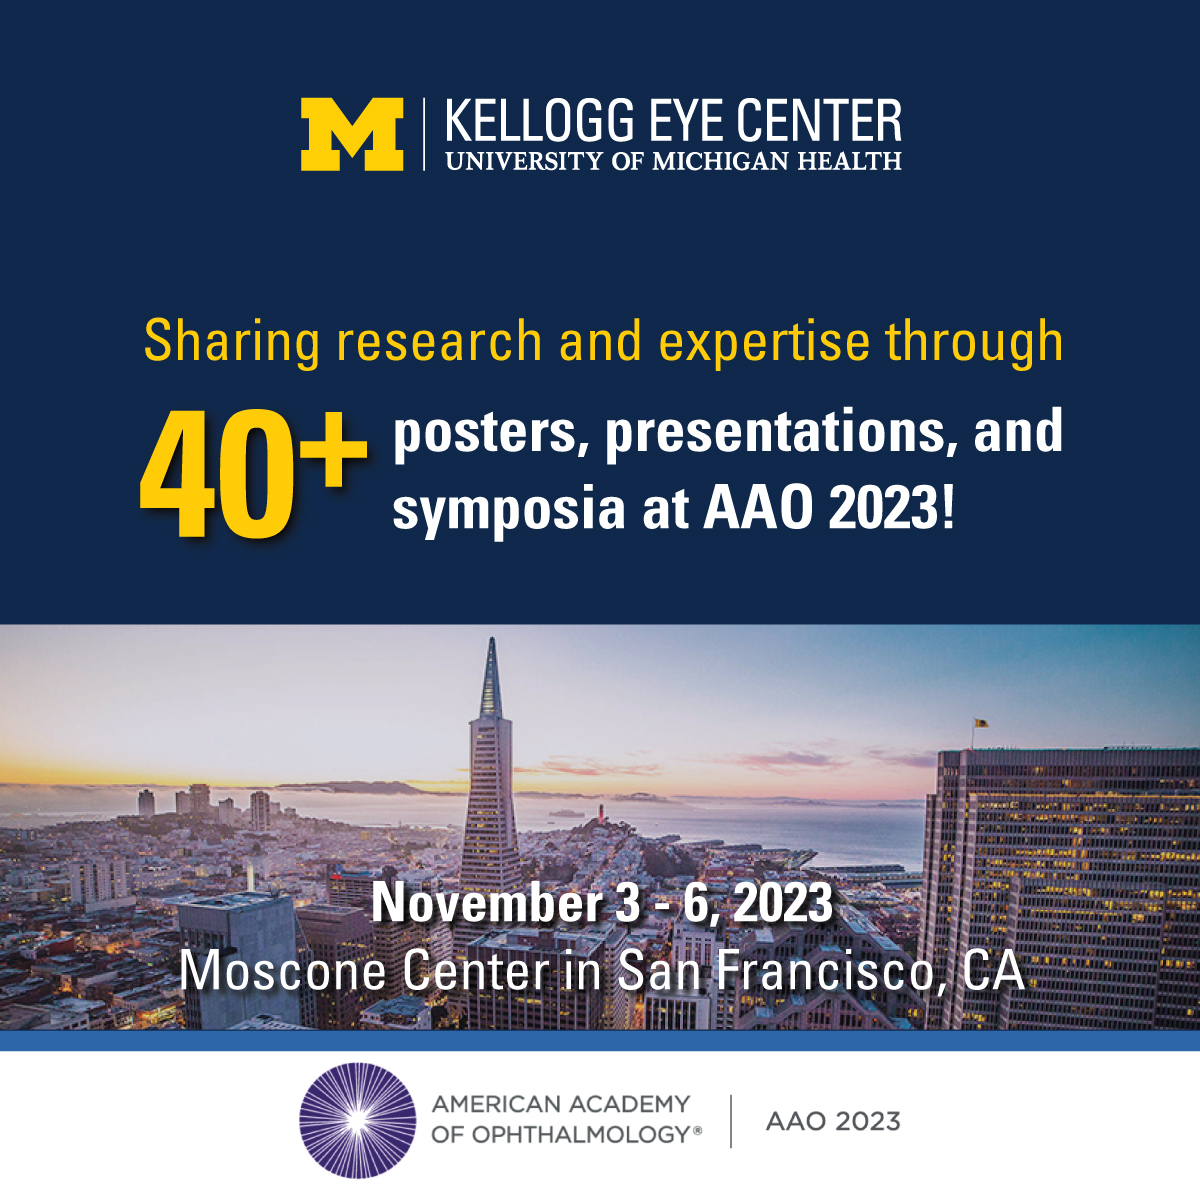 Come see us at #aao2023 as we showcase our department's incredible research and expertise through more than 40 posters, presentations, and symposia! For a detailed list of our schedule, please visit: medicine.umich.edu/dept/ophthalmo…